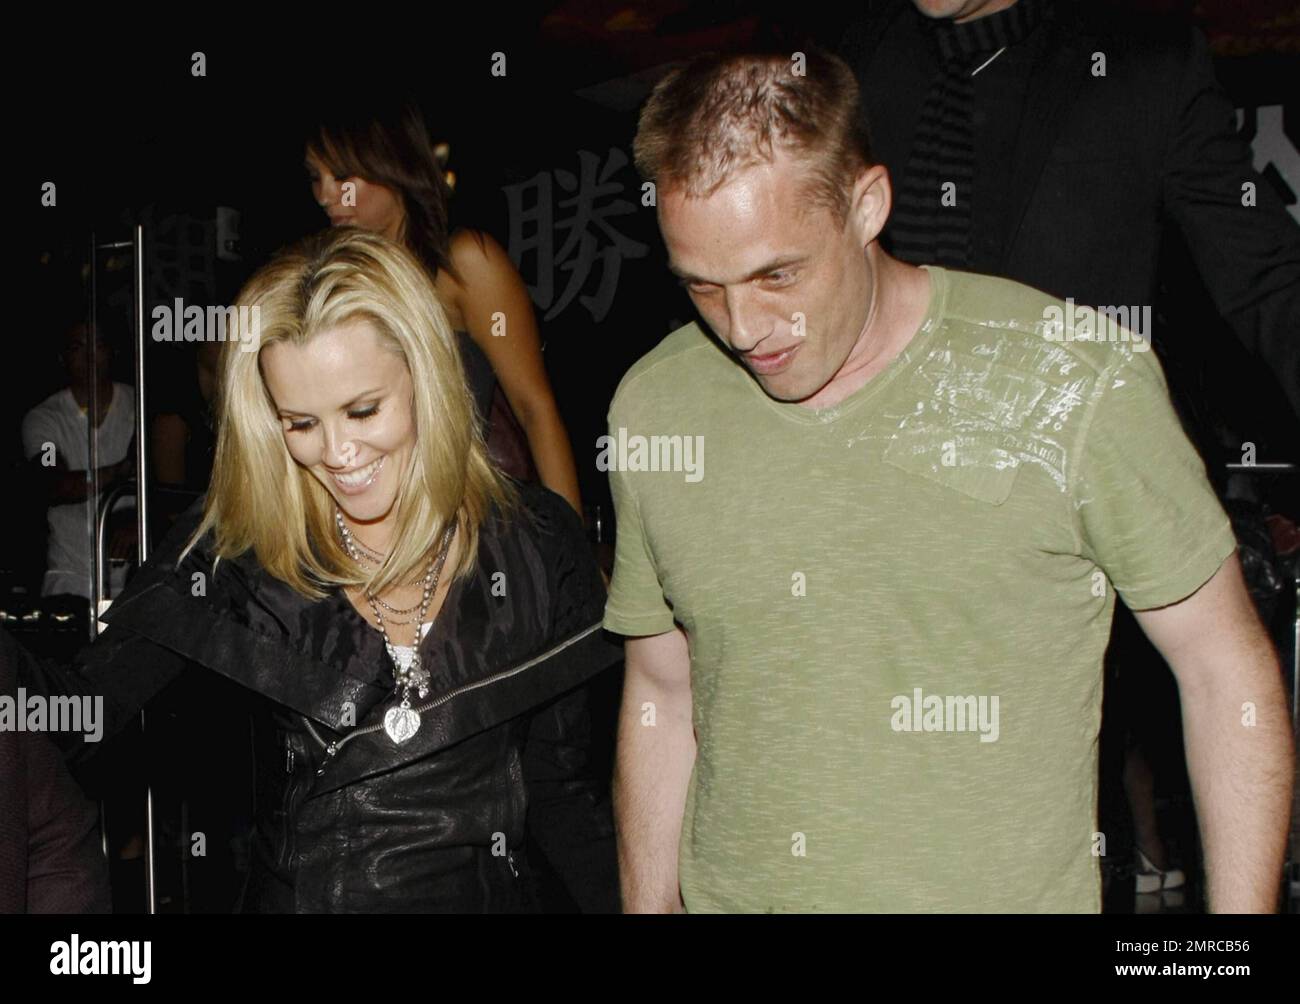 Jenny McCarthy holds hands with a new boyfriend as they leave Katsuya restaurant after dinner.  The former Playboy playmate recently split from long-time boyfriend Jim Carrey and has since been reportedly seen on dates with different men. McCarthy, who has an eight-year-old son with ex-husband John Mallory Asher, smiled and looked happy as she left the restaurant.  Since McCarthy and Carrey announced via Carrey's Twitter page that they were breaking up reports suggest that they remain amicable. Los Angeles, CA. 05/14/10. Stock Photo